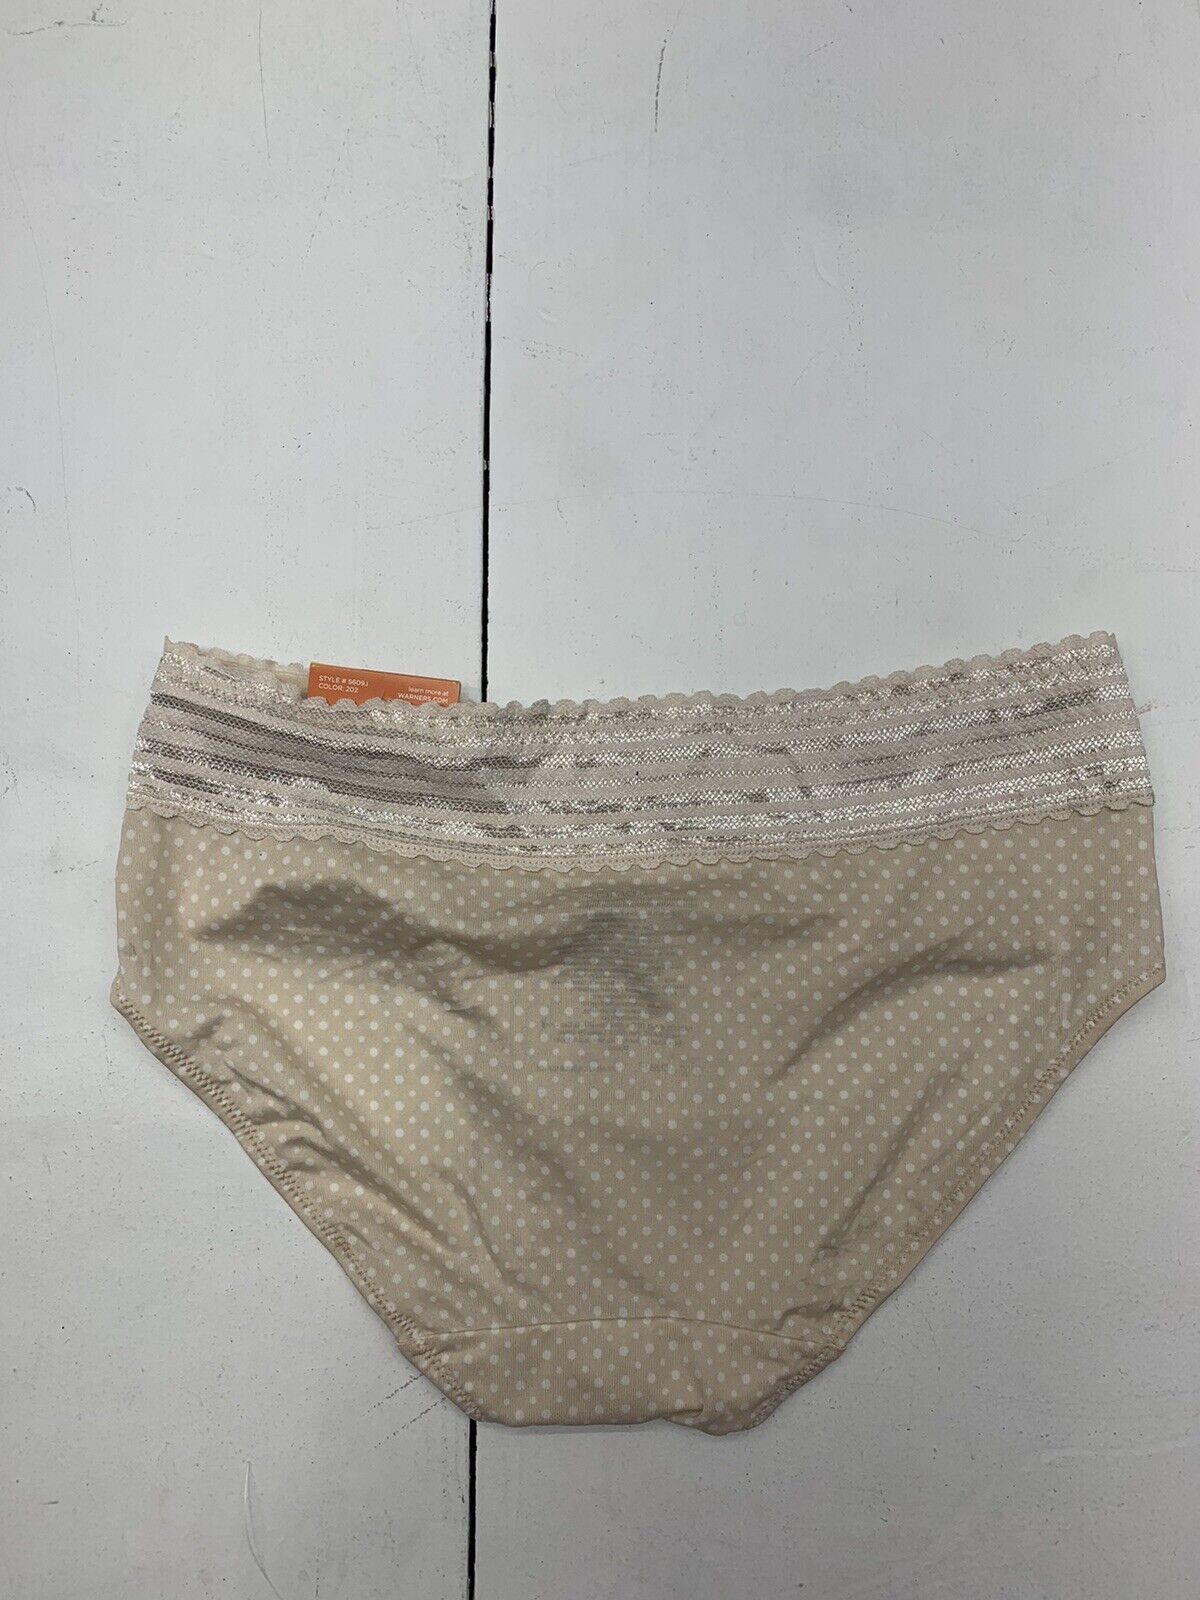 Warners ladies panties hipster cotton lace size 5 S #RU1091P new with tags